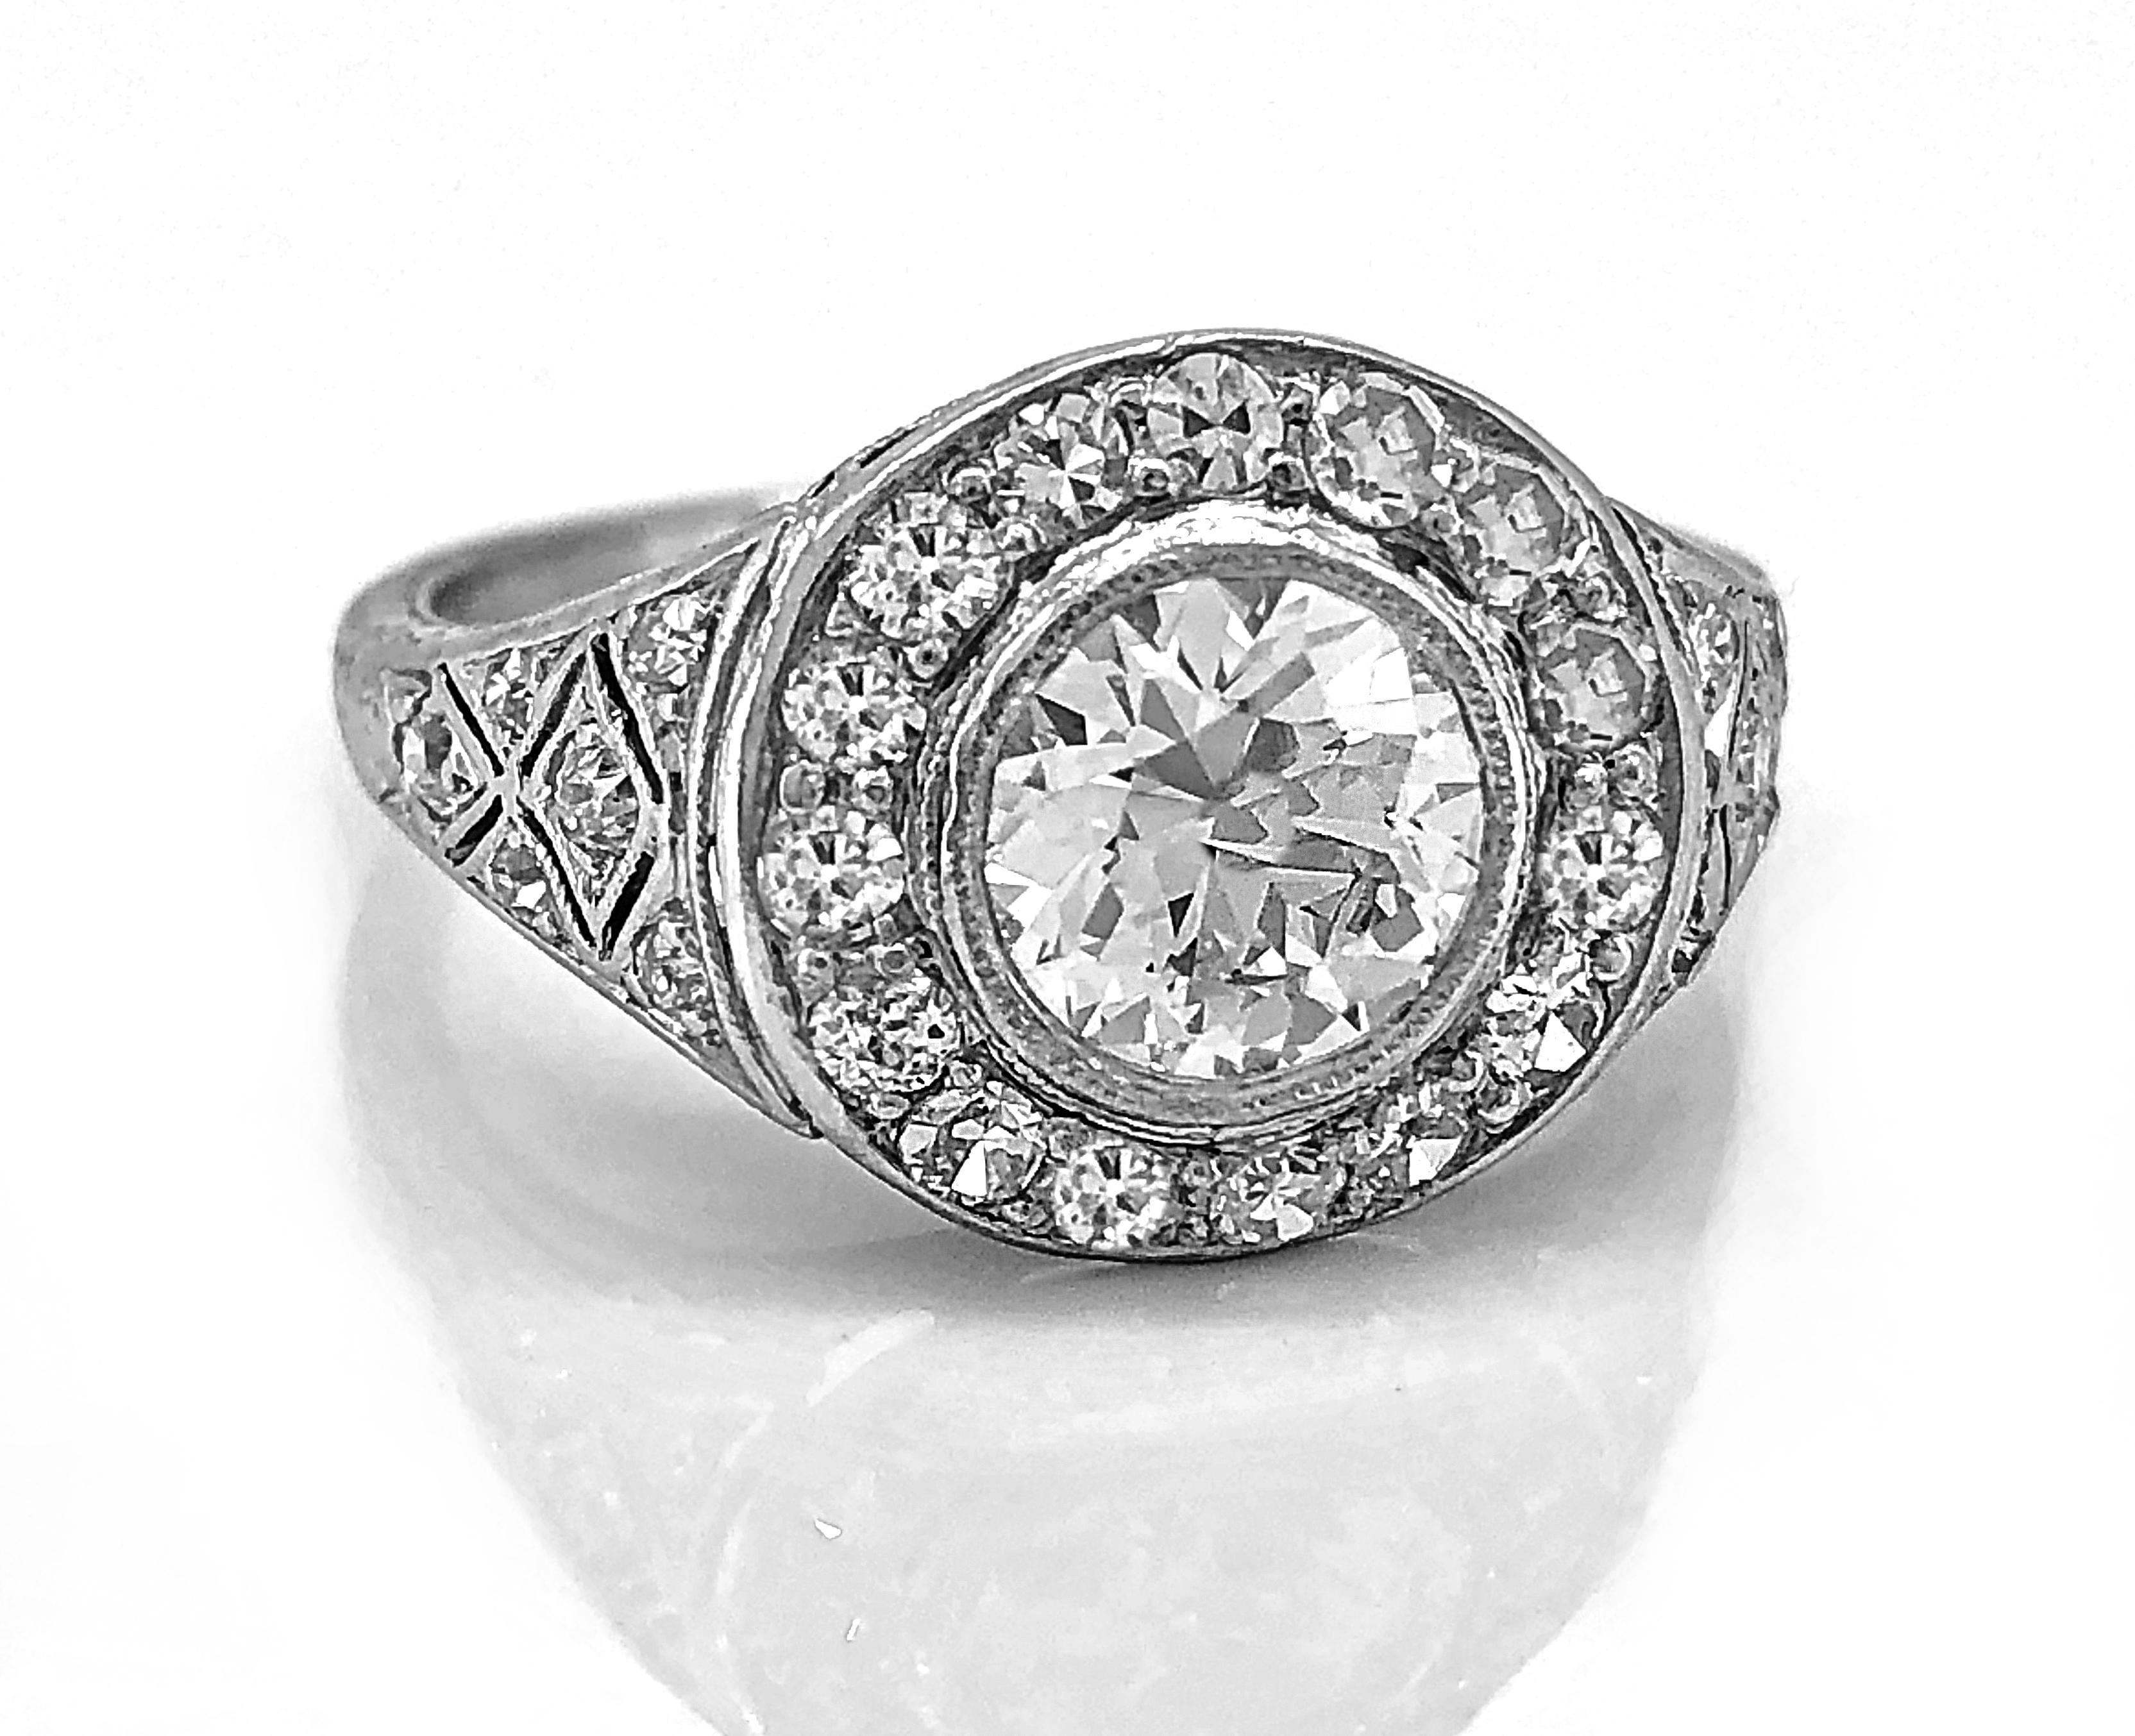 An incredibly beautiful Art Deco Antique Engagement ring in a 